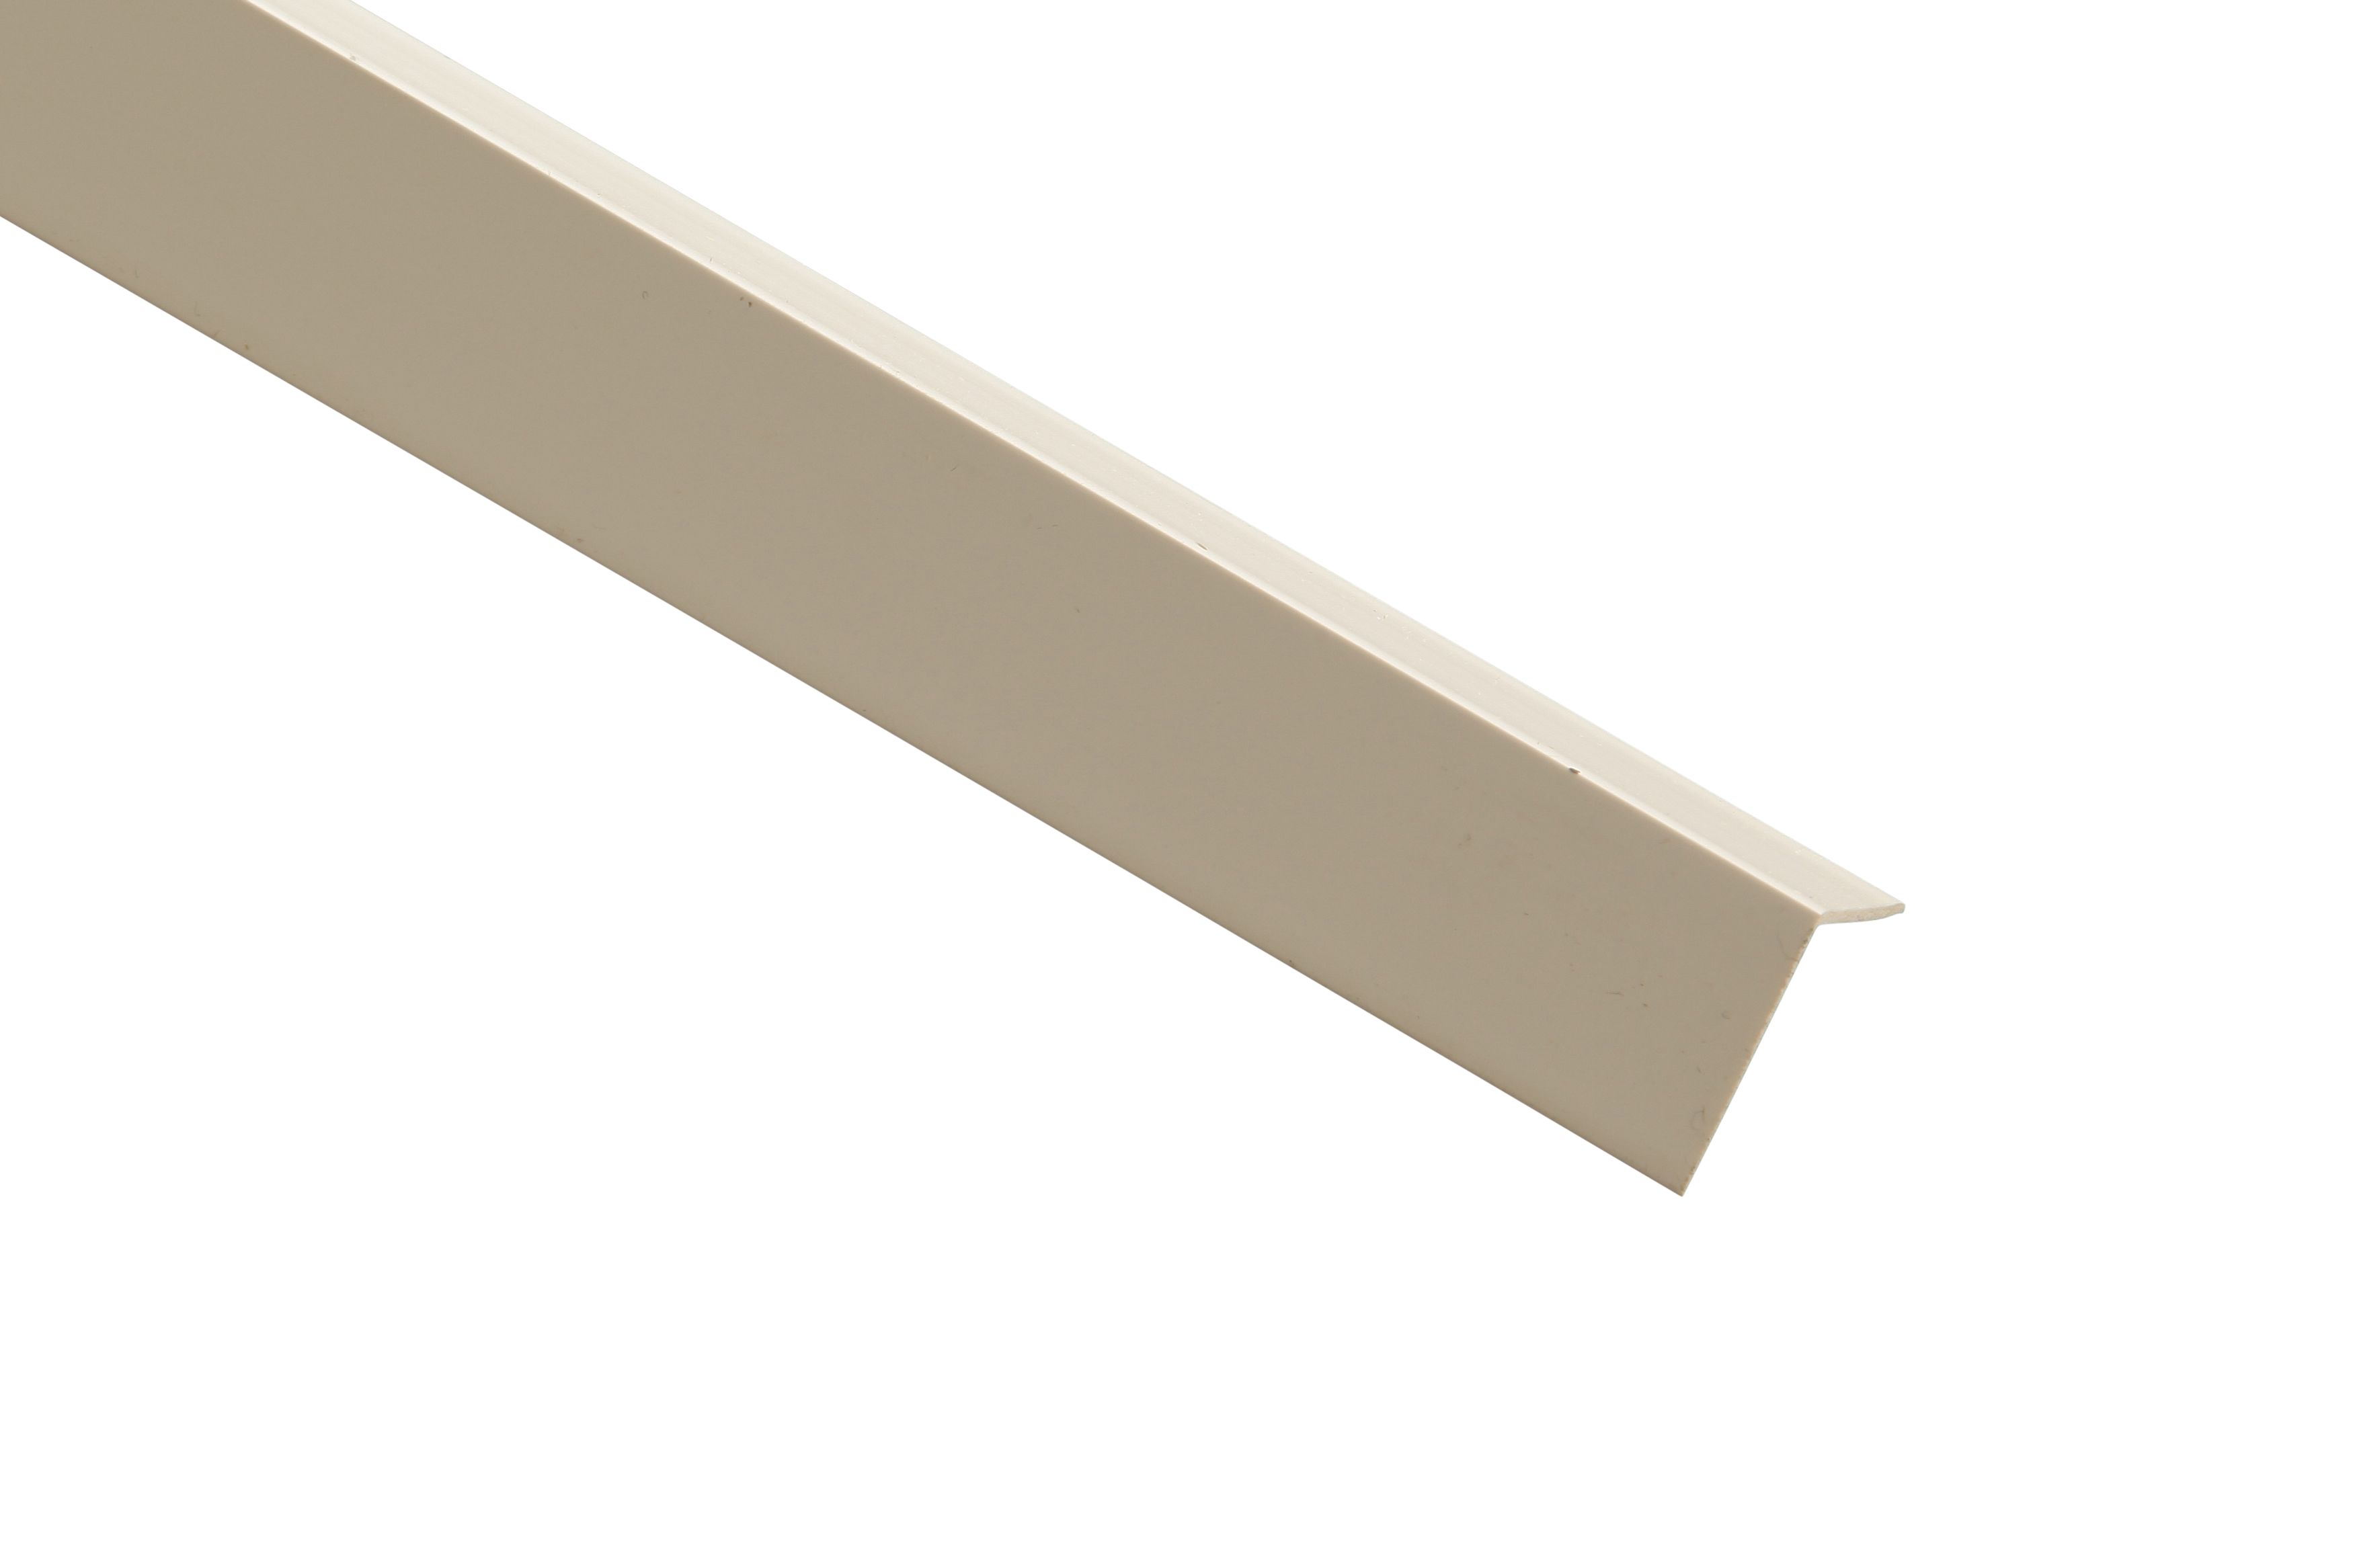 Image of Wickes PVC Angle Moulding - 18 x 18 x 2400mm